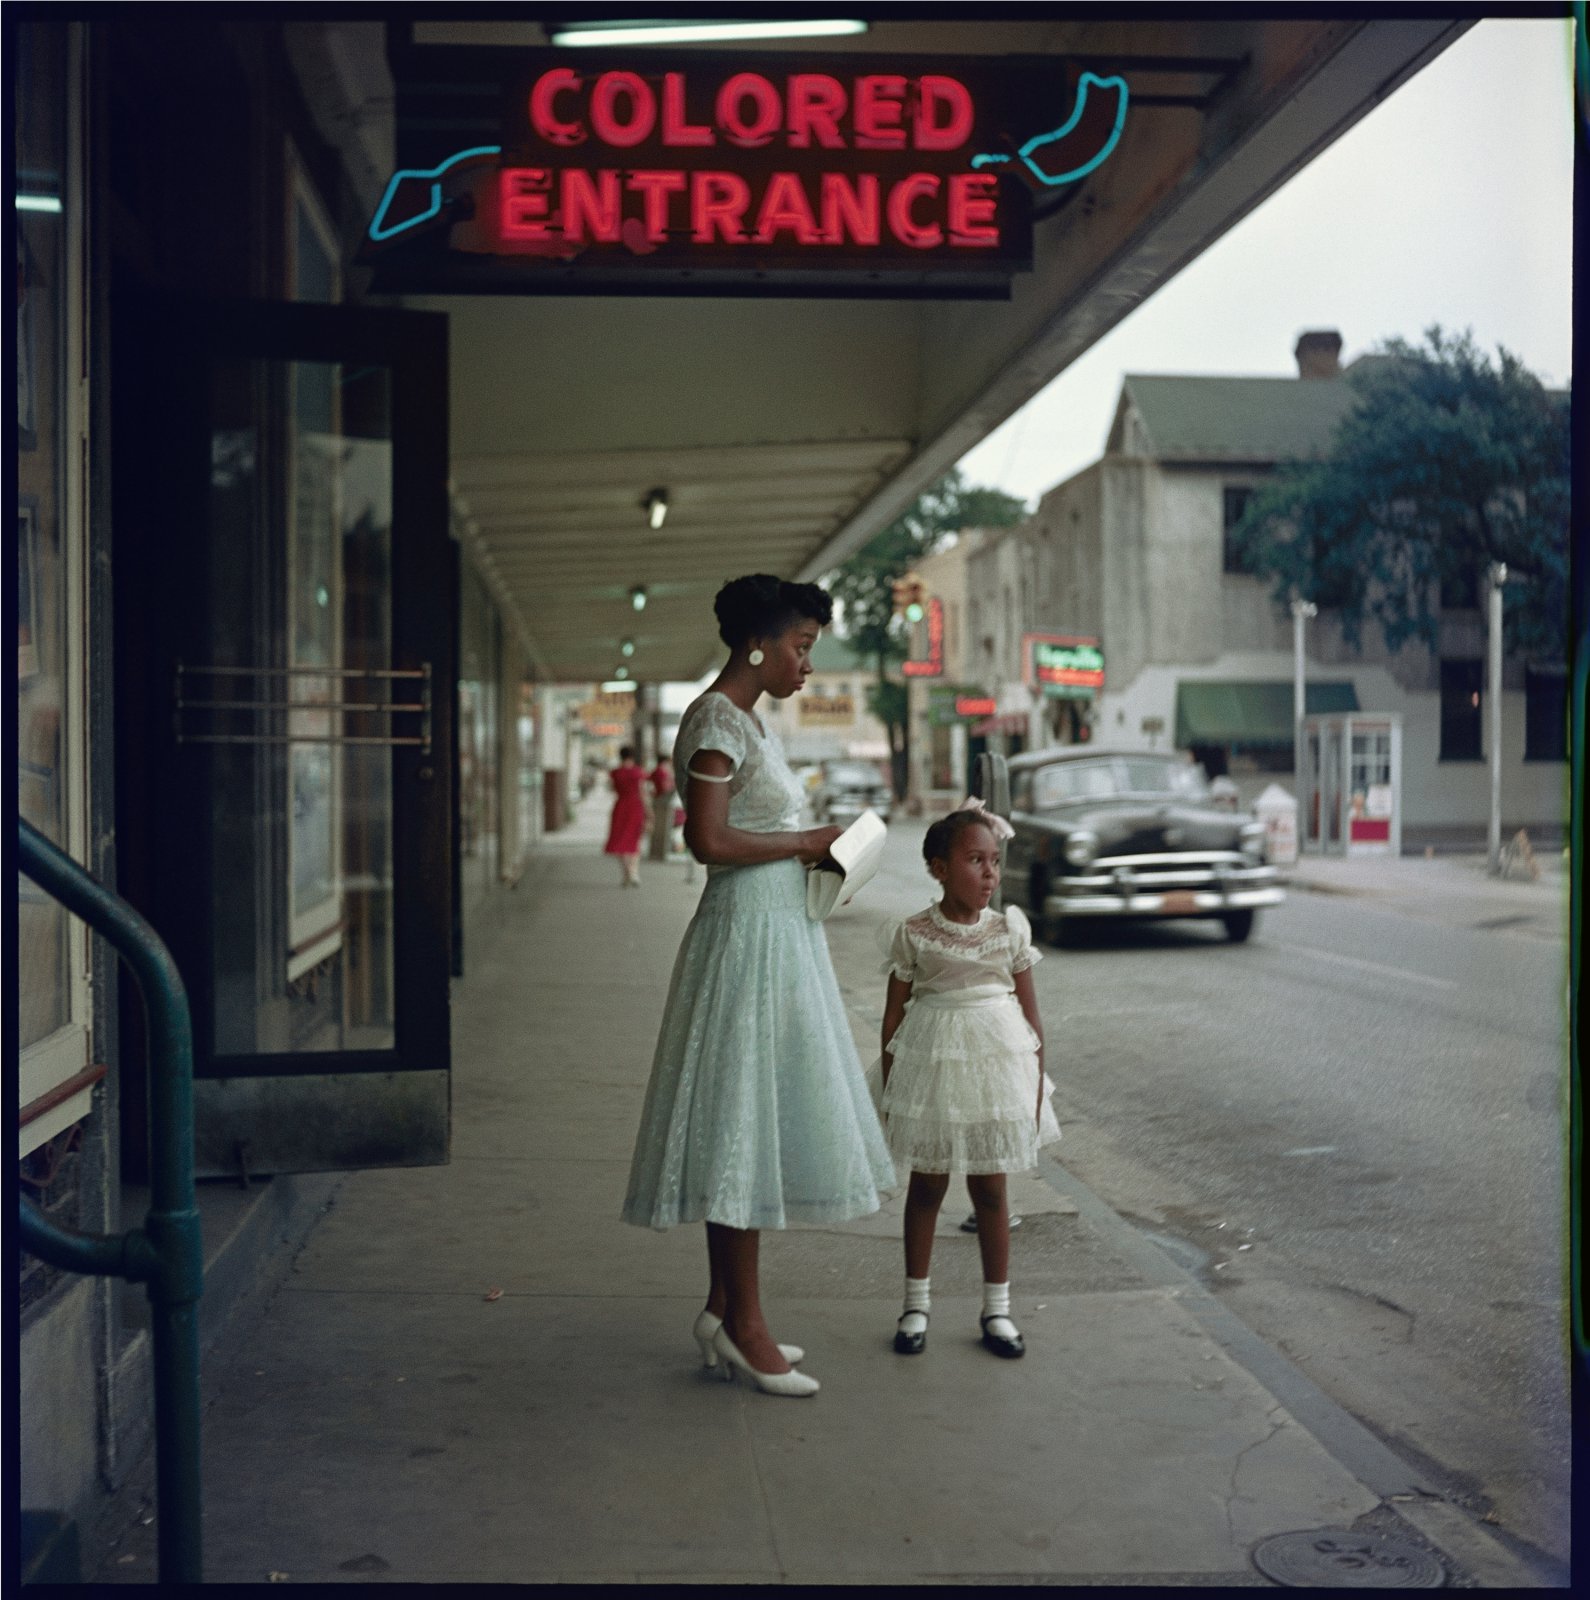 Department Store, Mobile, Alabama, 1956 Photograph by Gordon Parks. Courtesy of and copyright The Gordon Parks Foundation